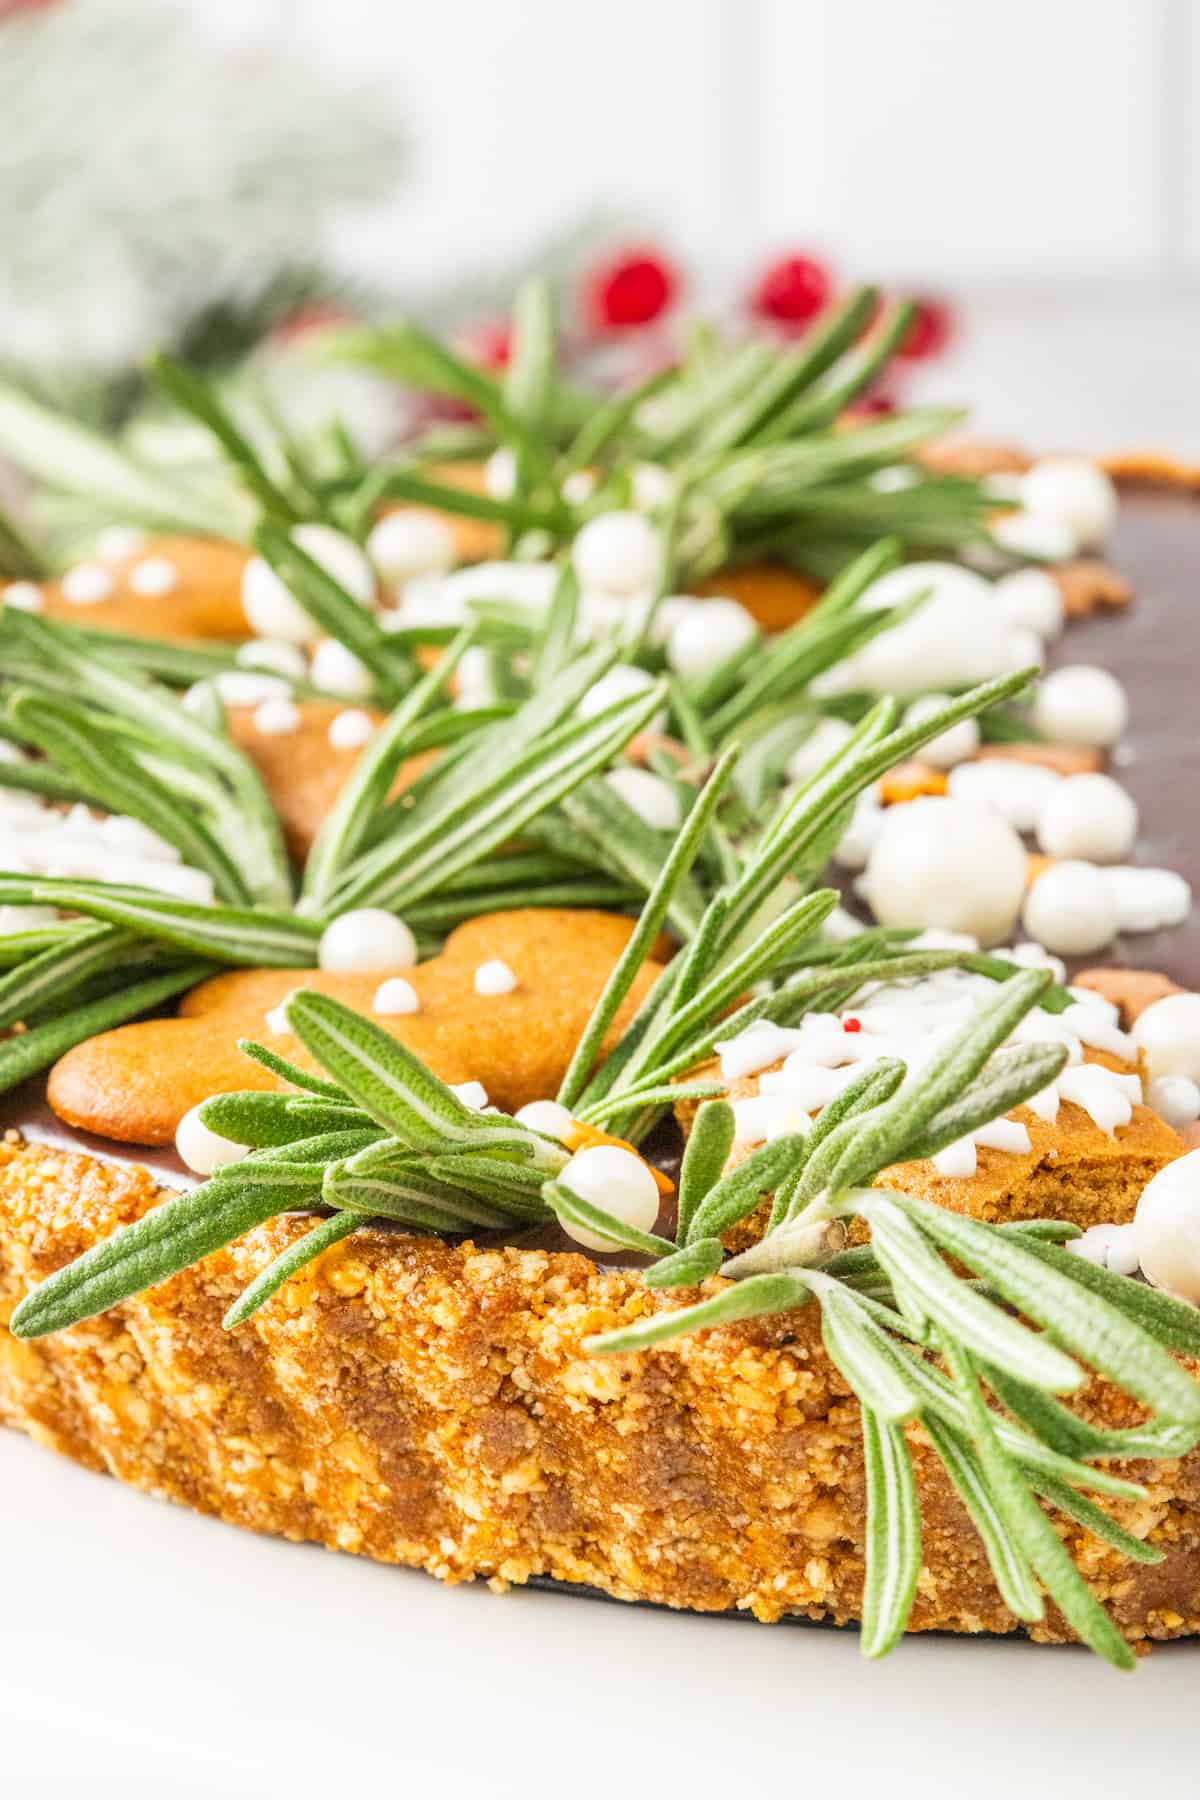 A gingerbread tart with rosemary sprigs on top.